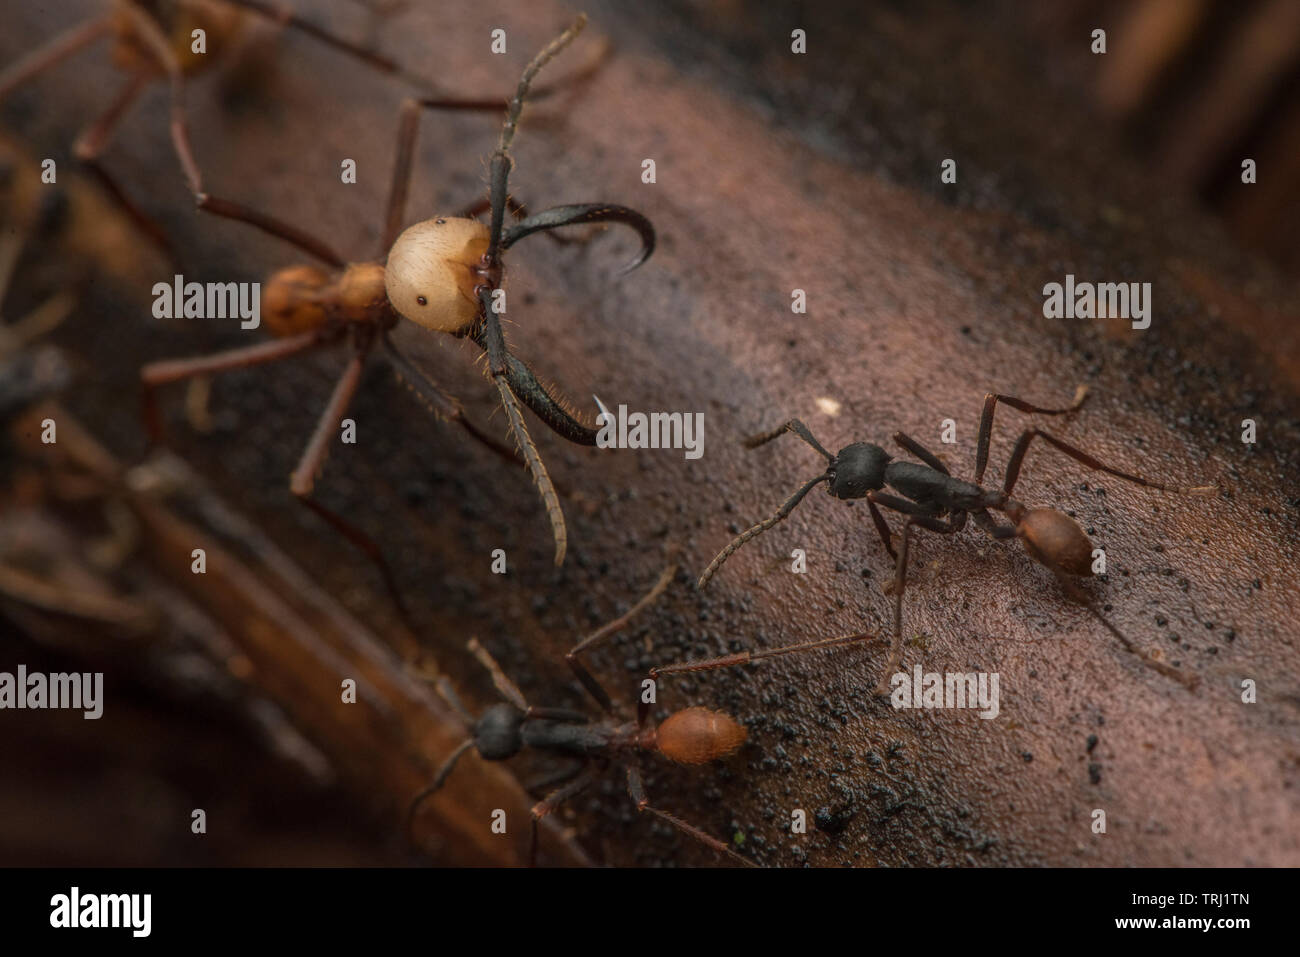 Army ants (Eciton burchellii) swarm across the forest floor, large soldier ants can be distinguished by their huge mandibles. Stock Photo